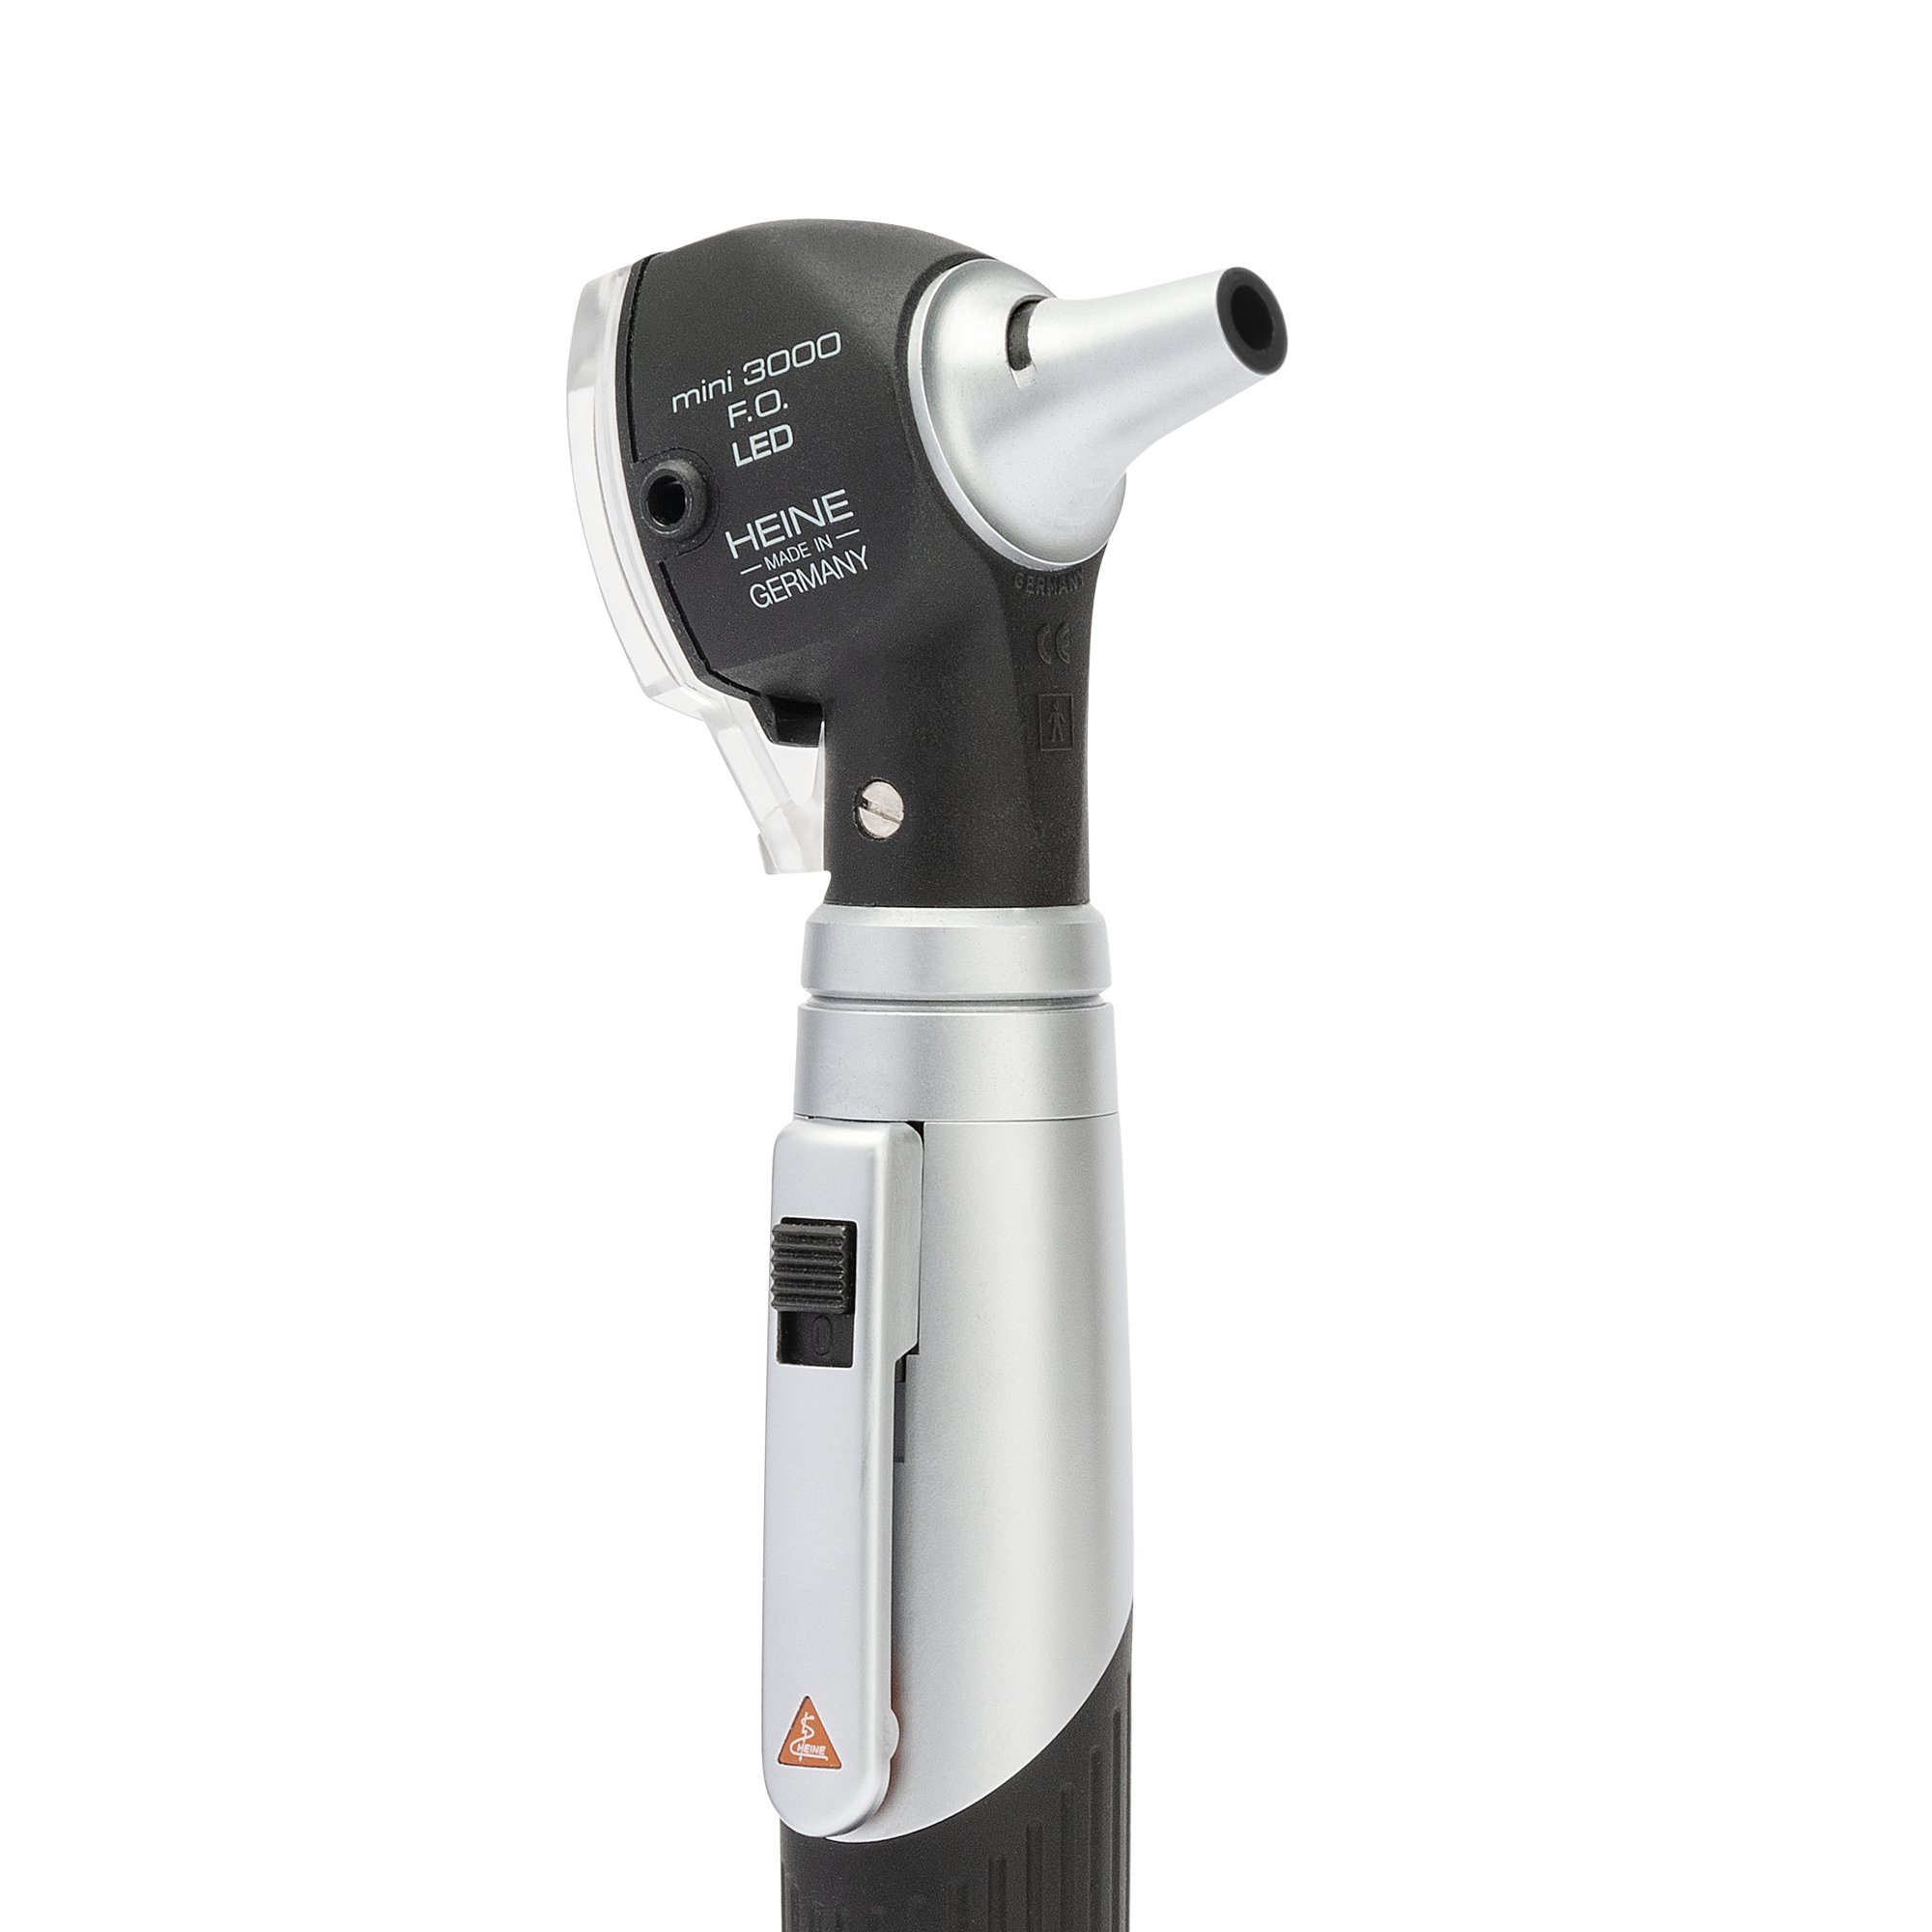 D-886.11.022-HEINE-mini3000-LED-otoscope-ophtalmoscope-set-rechargeable-handle-3